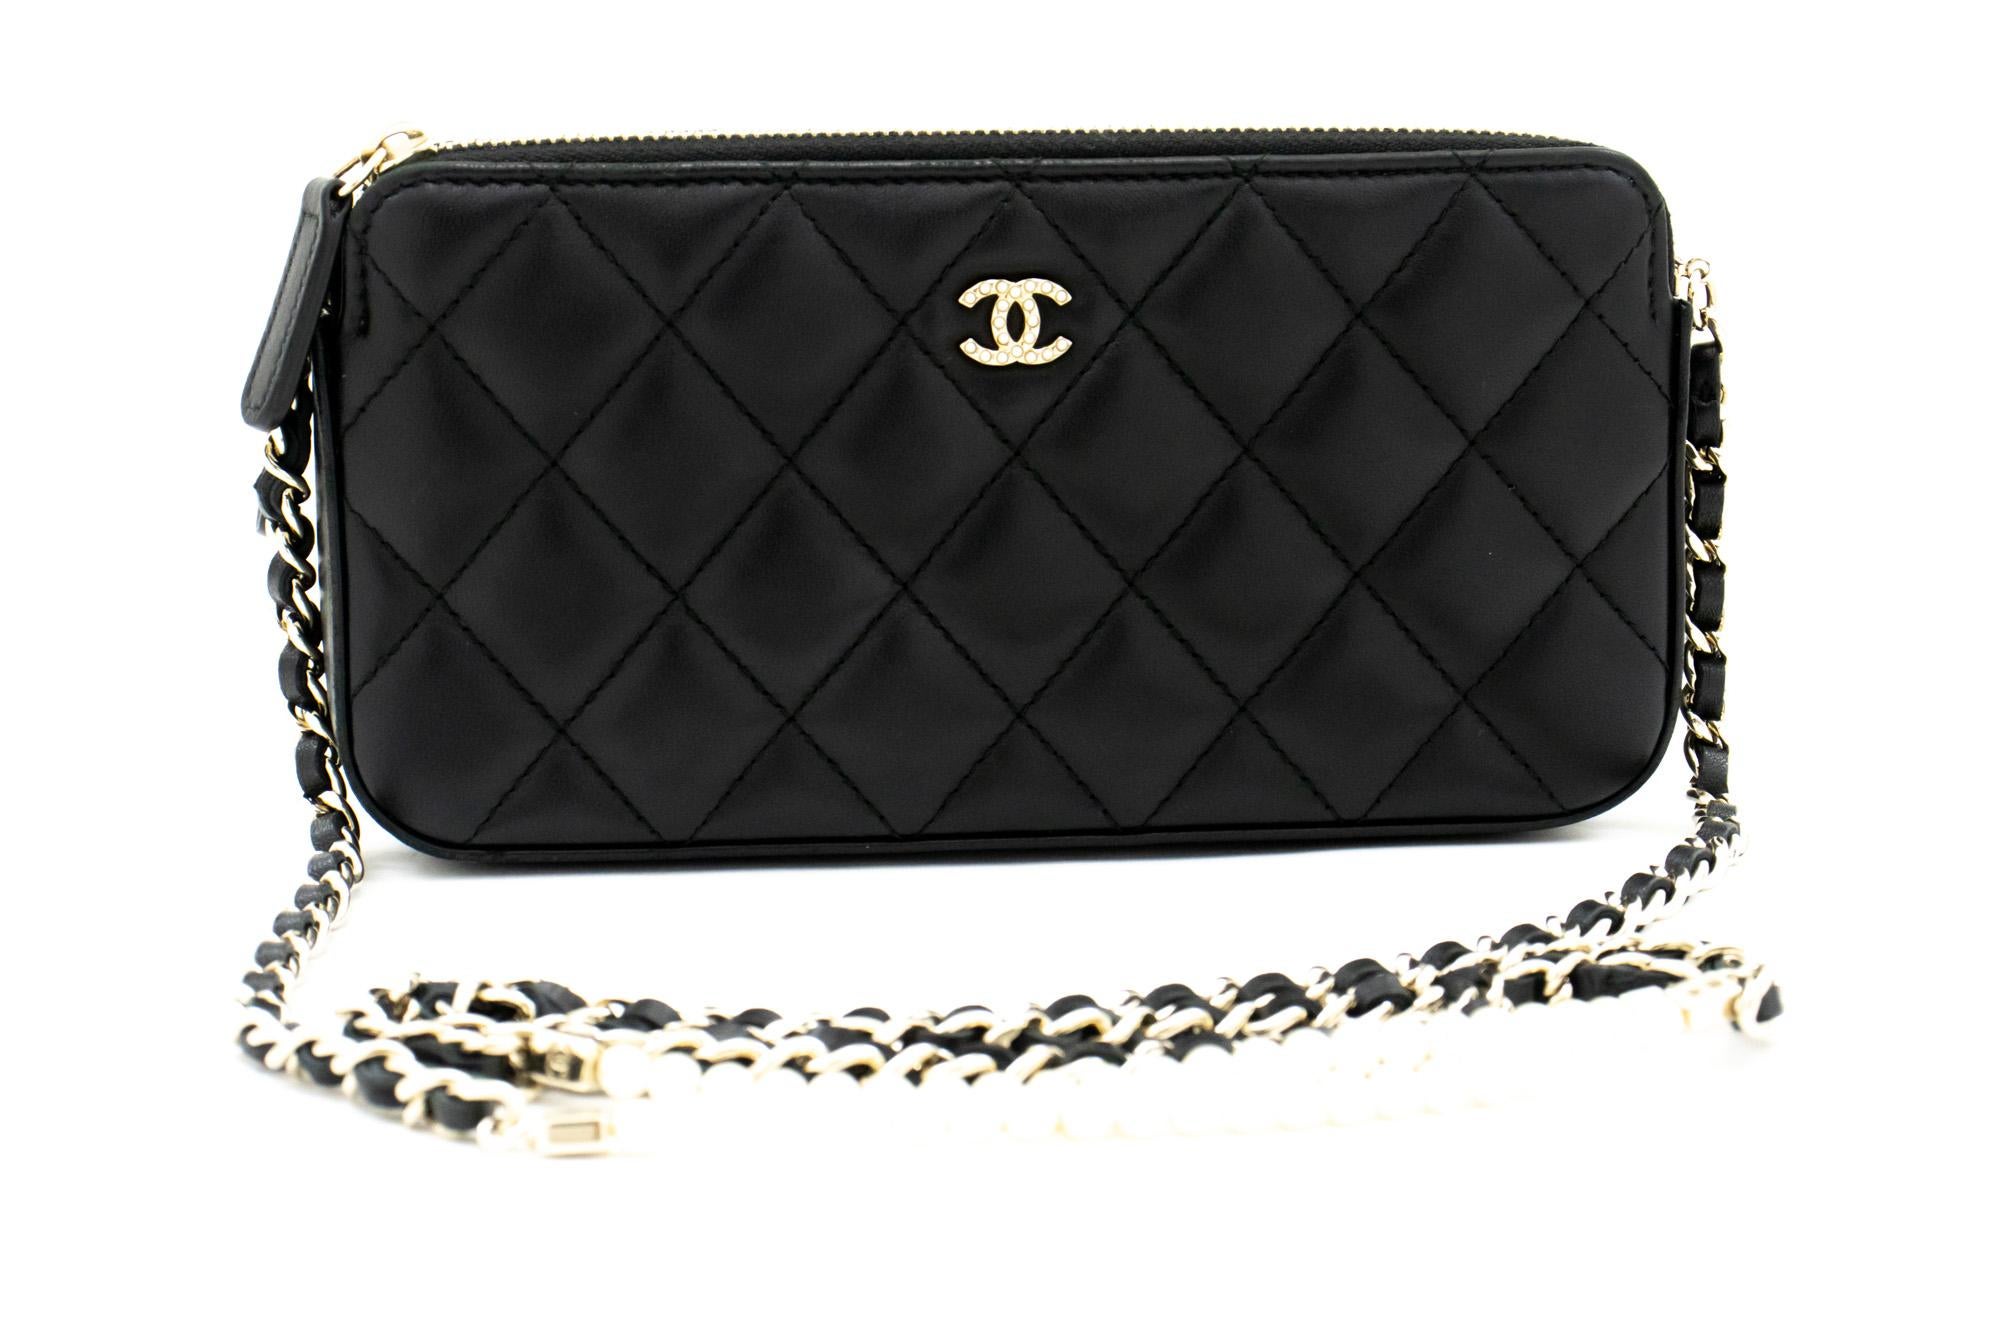 An authentic CHANEL made of black Lambskin Pearl Wallet On Chain WOC Double Zip Chain Bag. The color is Black. The outside material is Leather. The pattern is Solid. This item is Contemporary. The year of manufacture would be 2016.
Conditions &